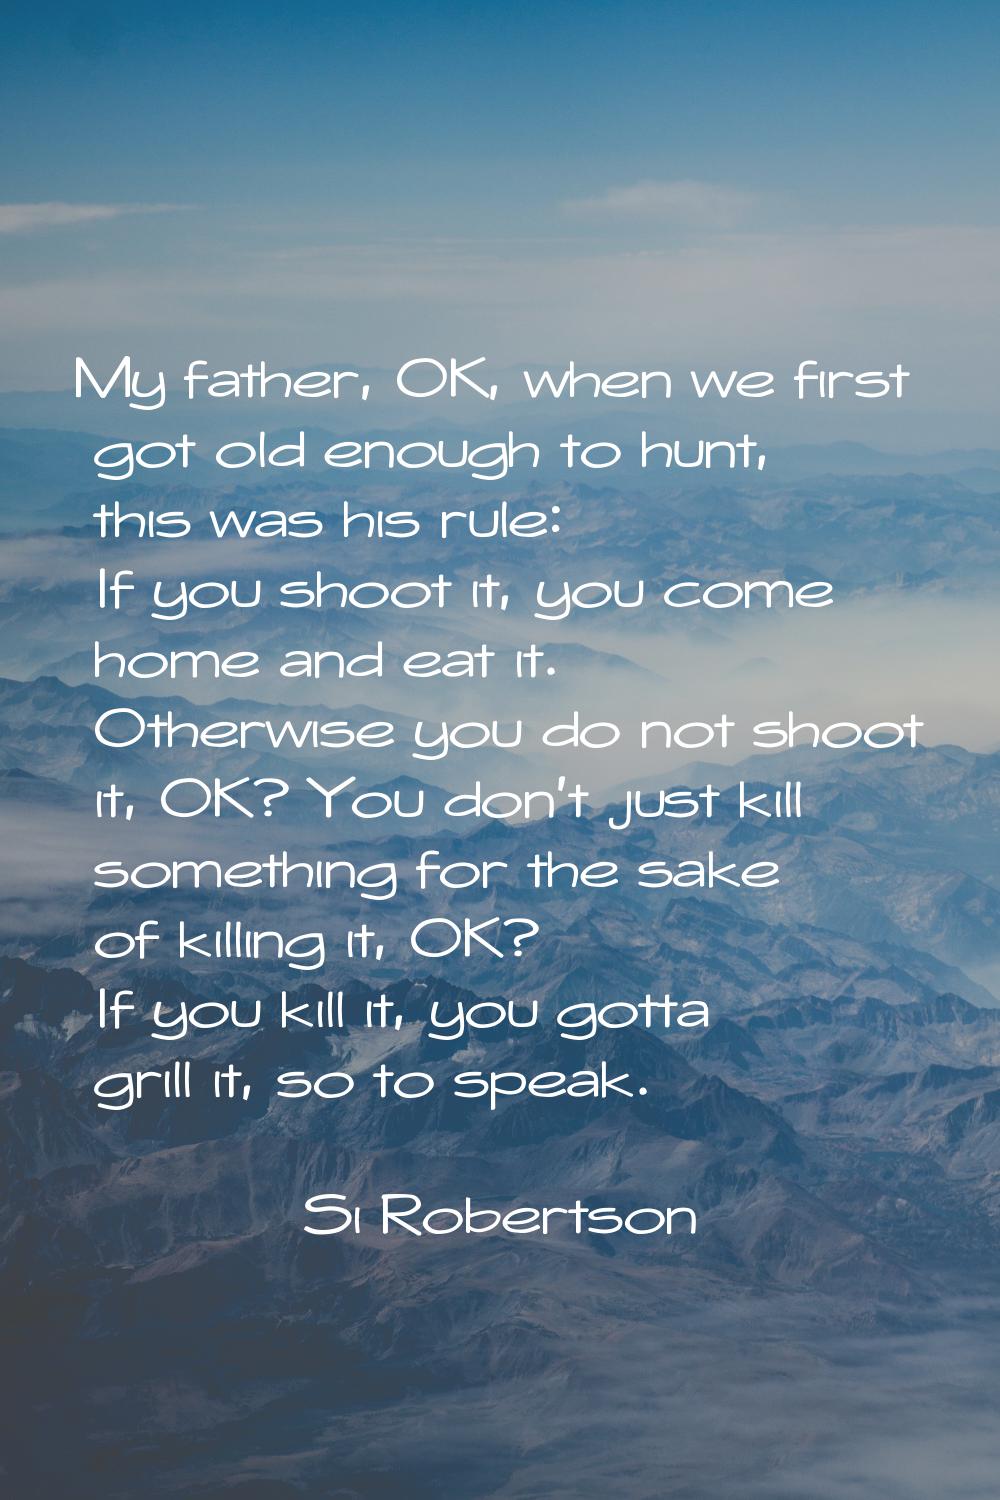 My father, OK, when we first got old enough to hunt, this was his rule: If you shoot it, you come h